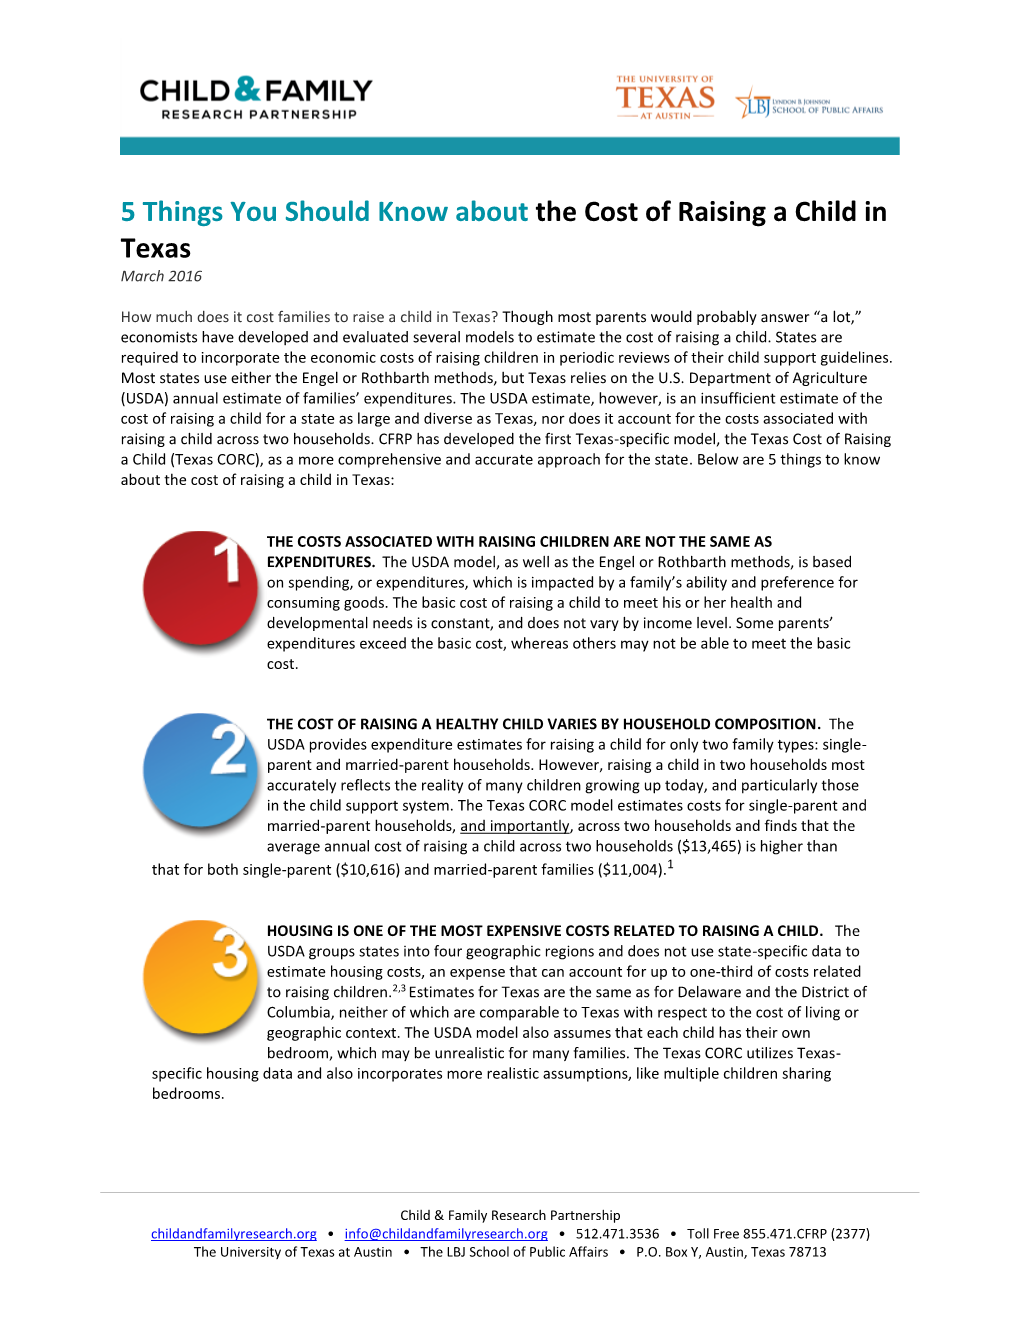 5 Things You Should Know About the Cost of Raising a Child in Texas March 2016